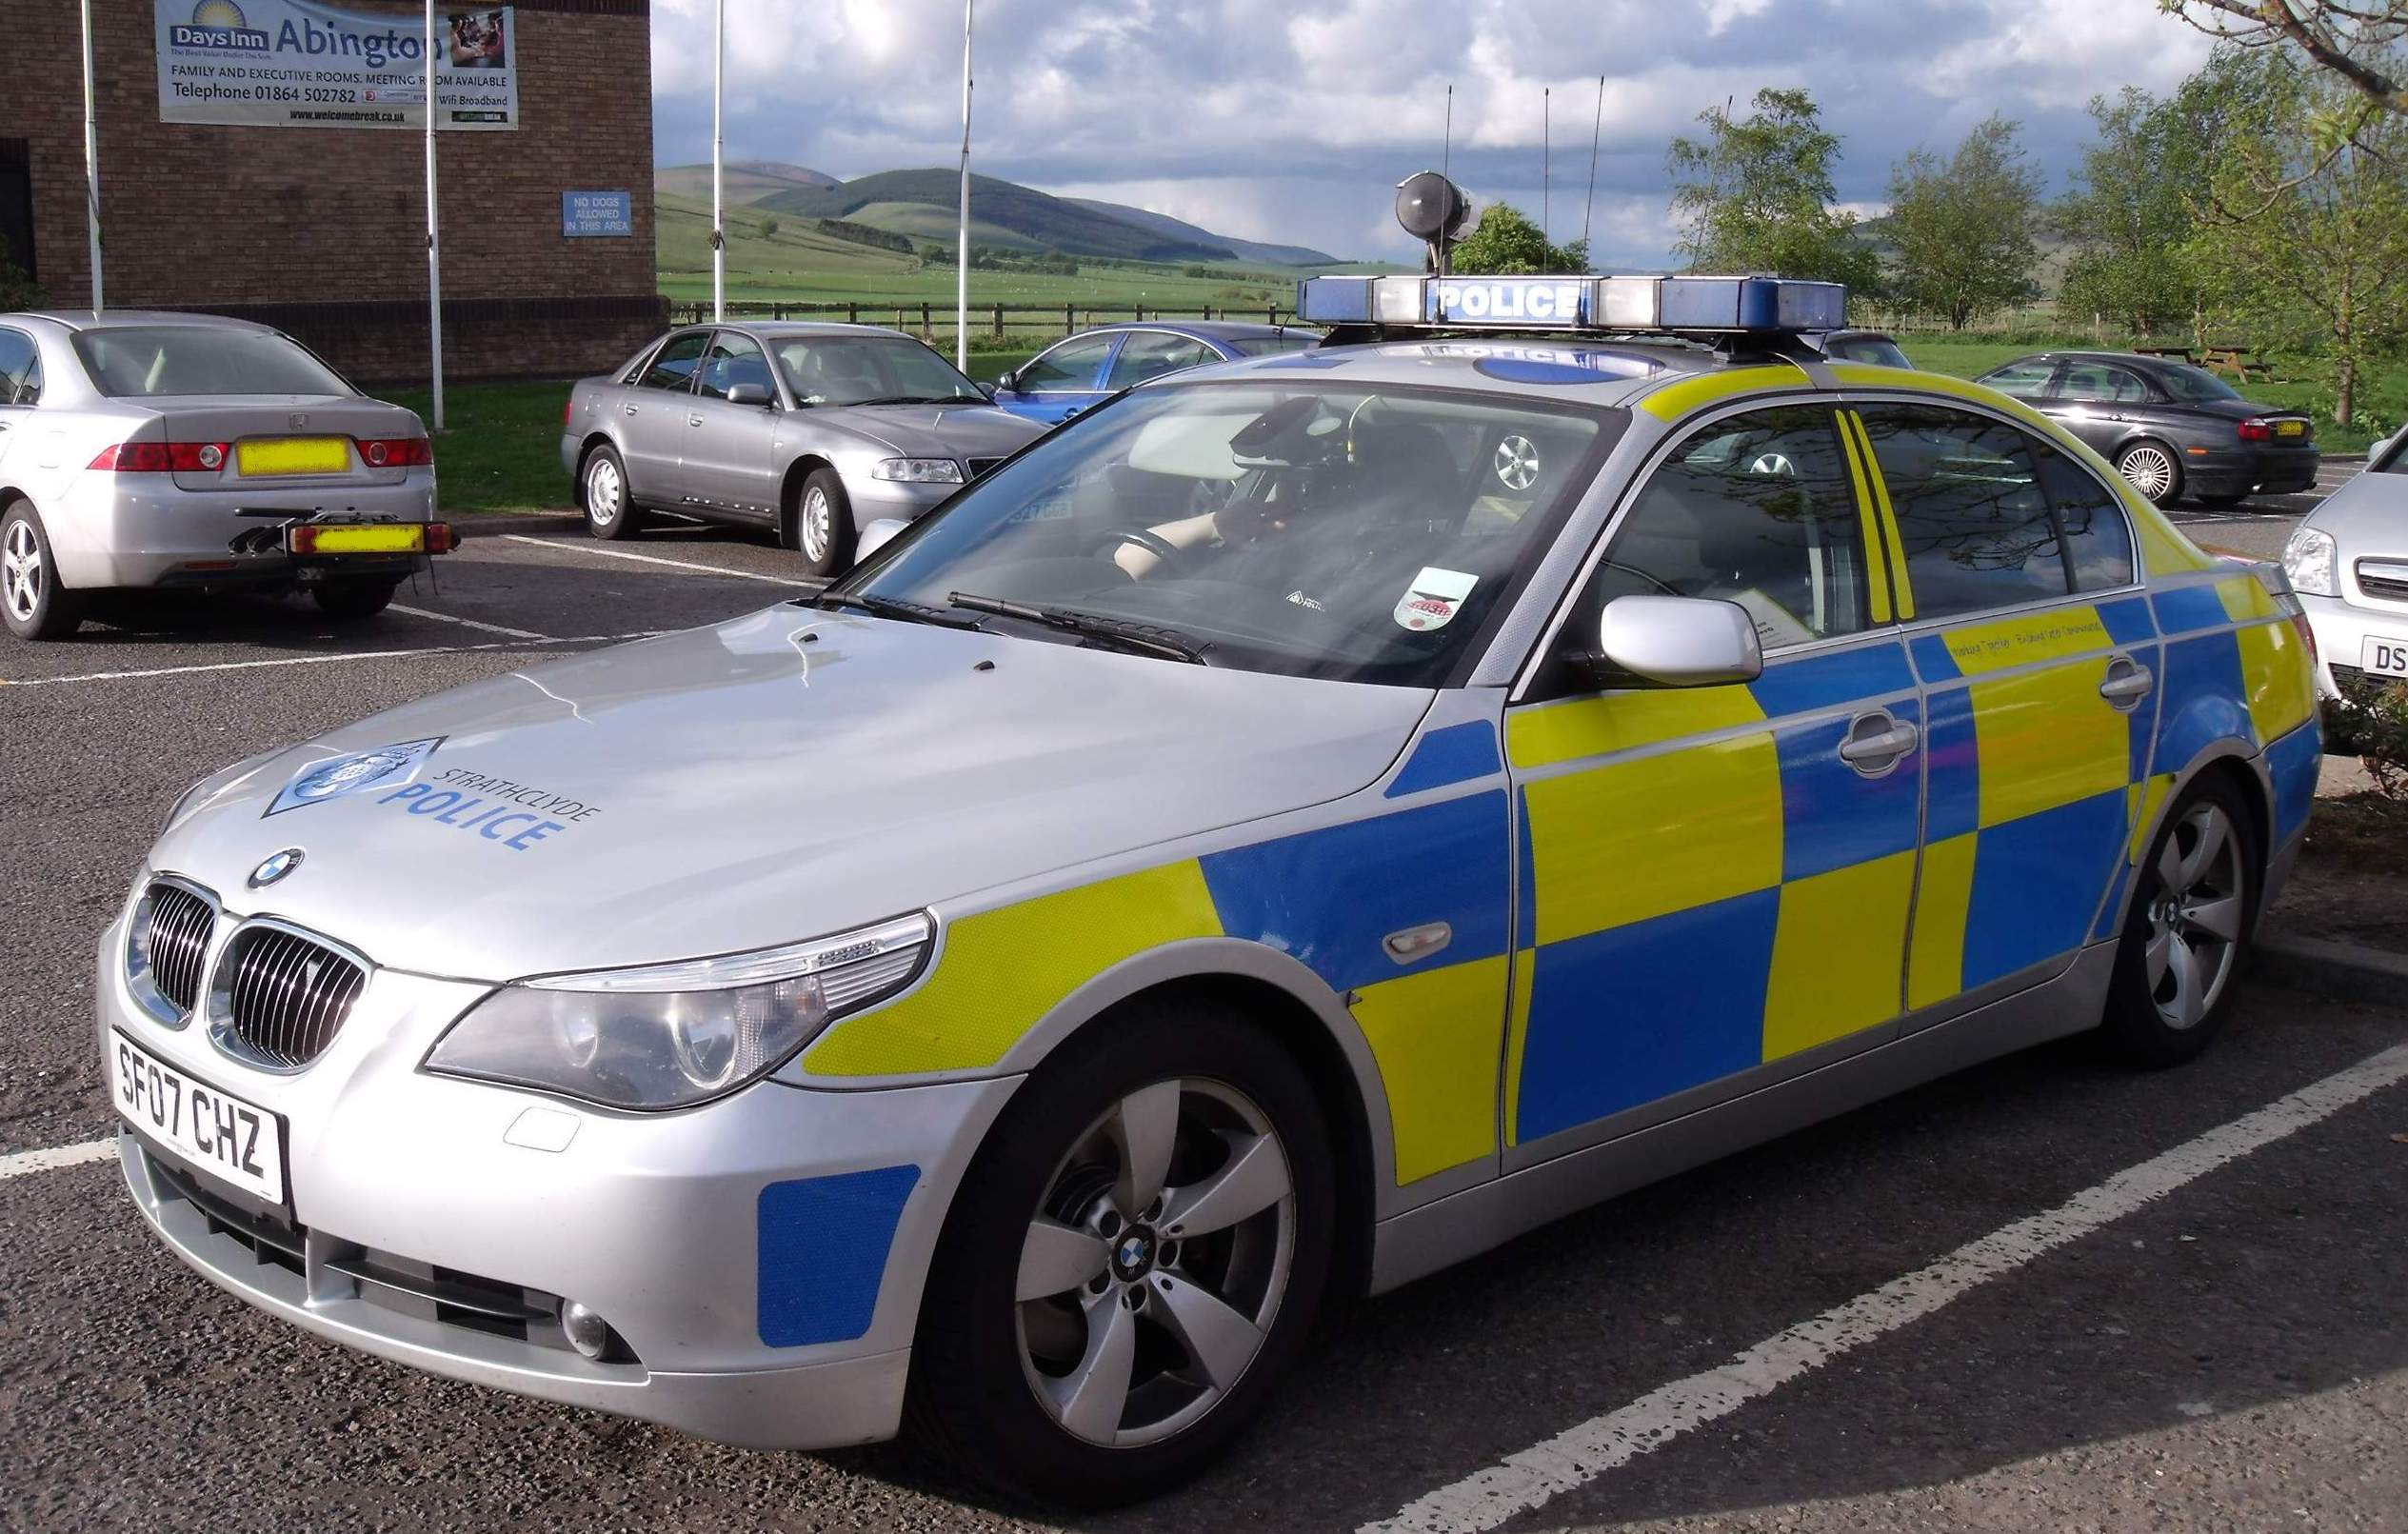 Strathclyde_Police_BMW_at_Abington_Services_M74 - Not £2 Grand